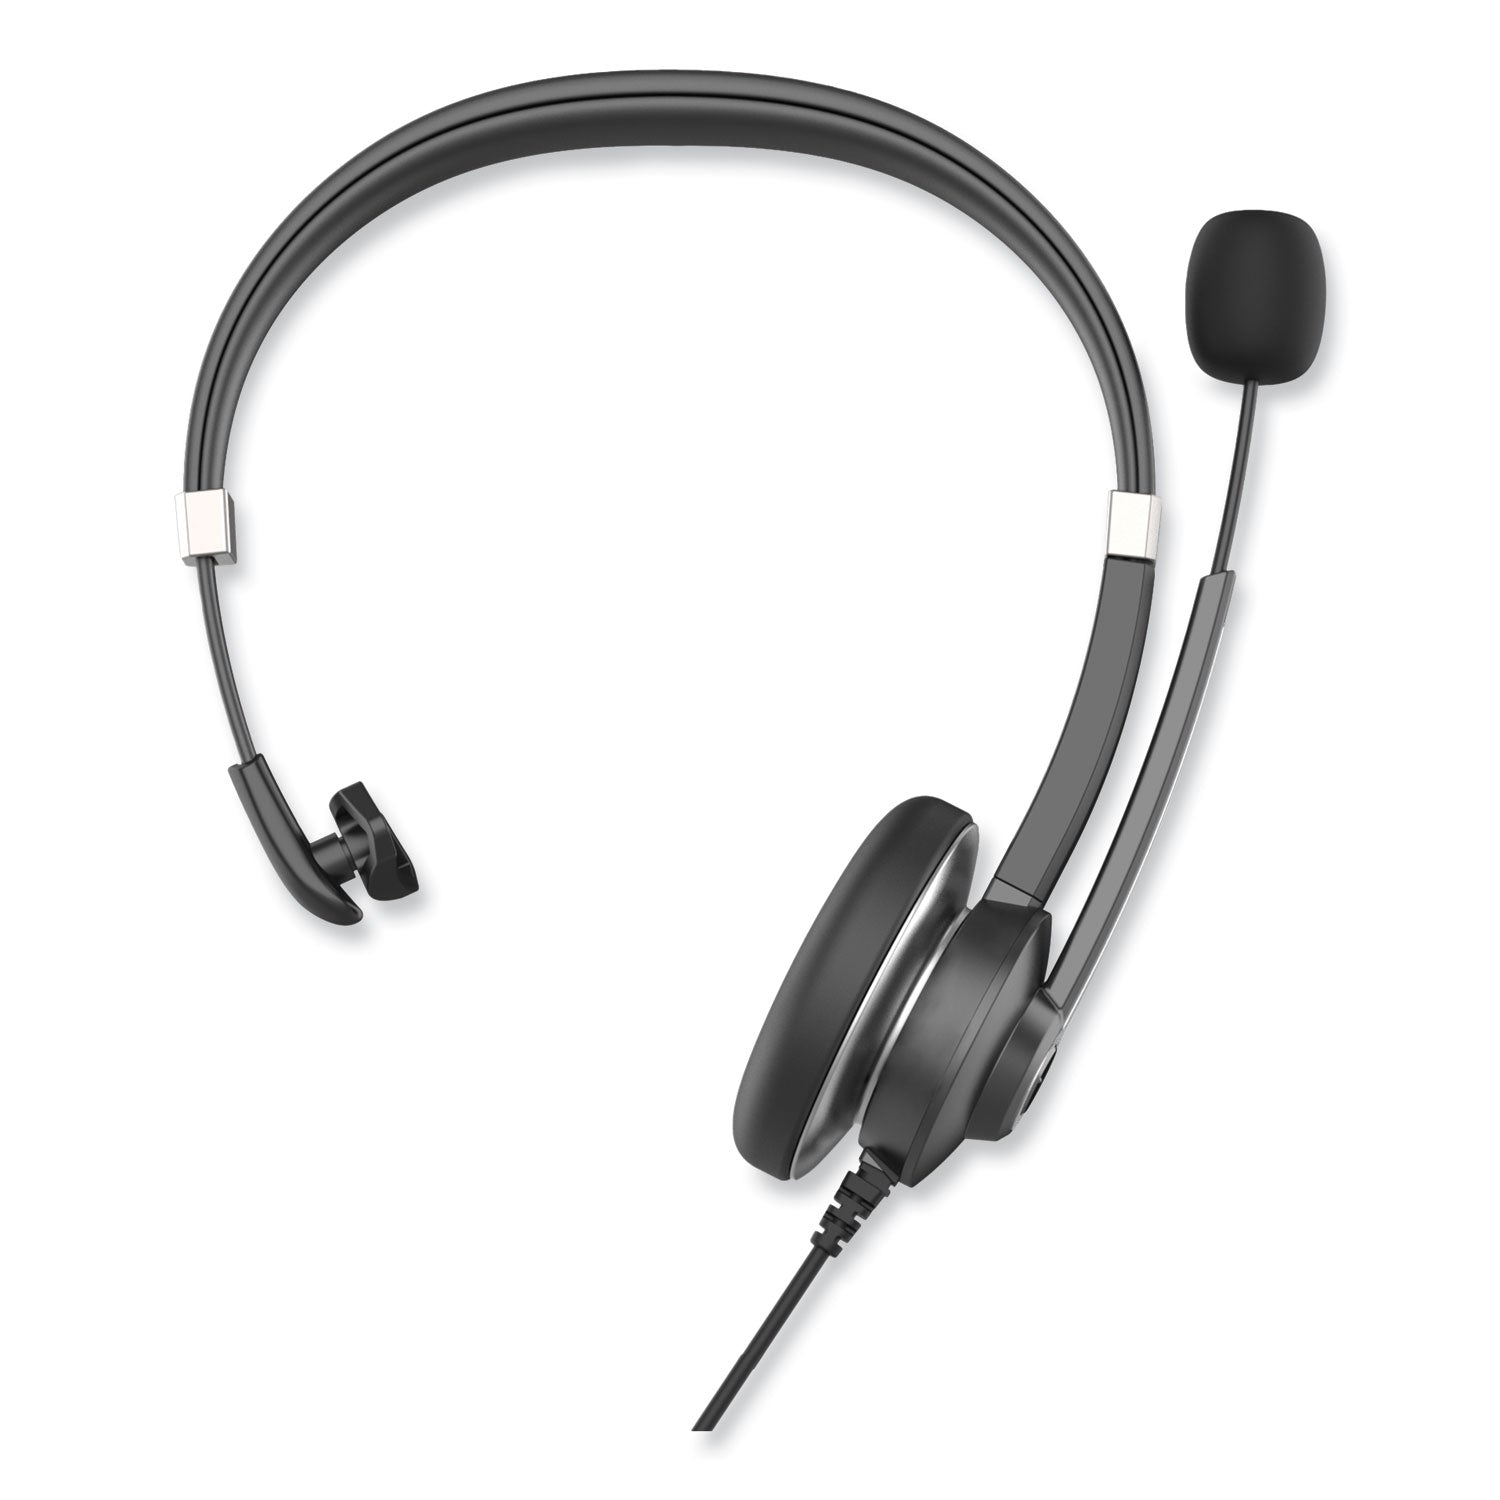 ivr70001-monaural-over-the-head-headset-black-silver_ivr70001 - 5